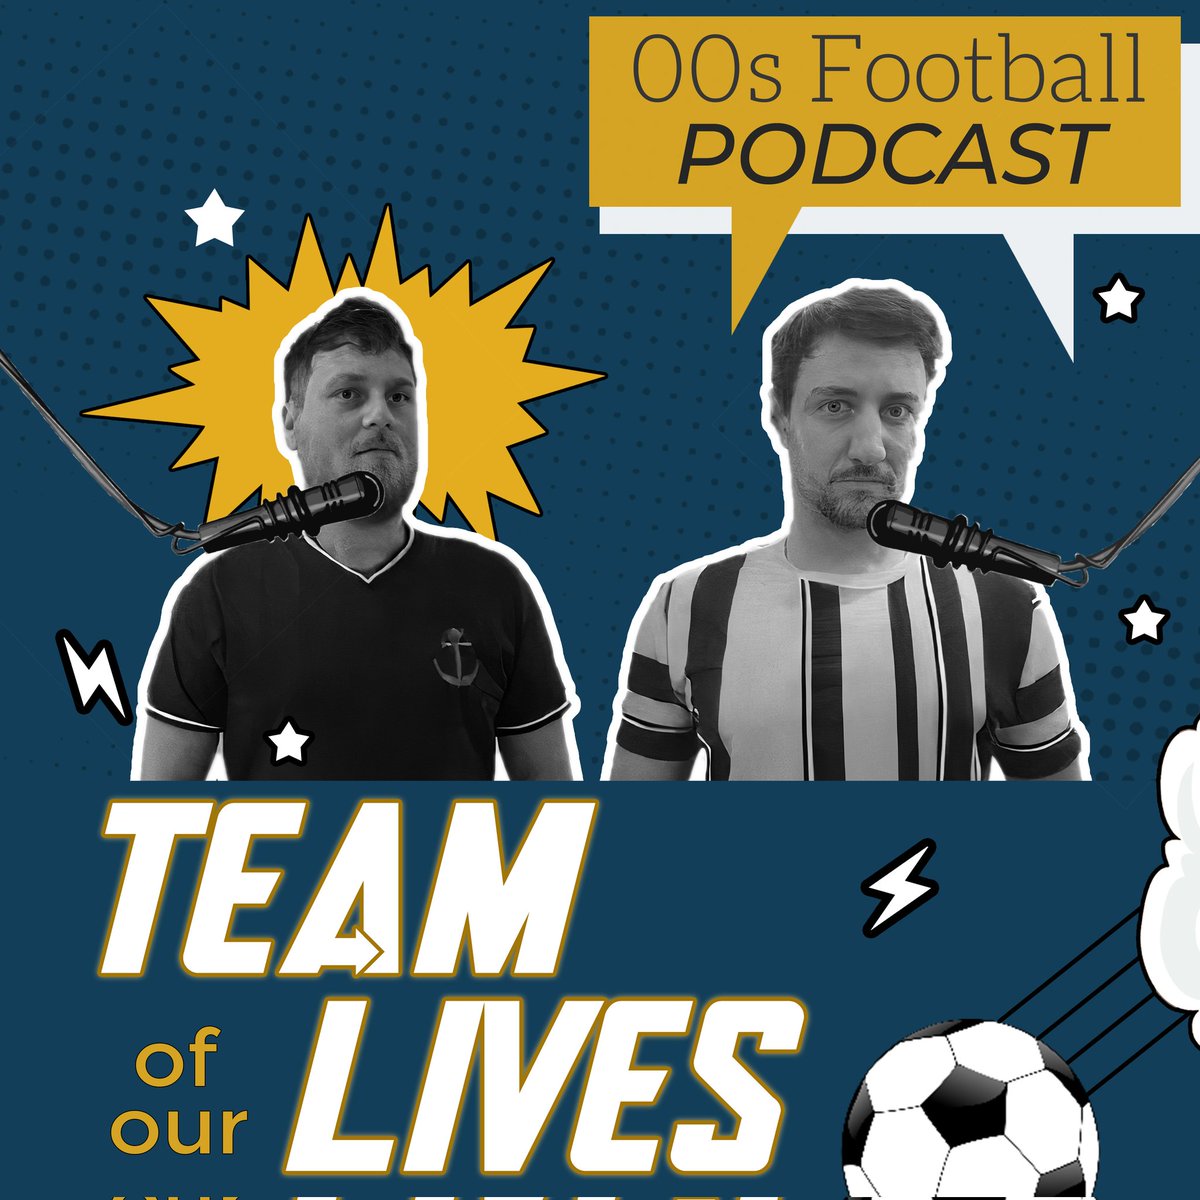 Team of our Lives 'THE 00s Football Podcast' will be back shortly for season two. 

🔵 New Cover Art
🔵 New Guests 
🔵 New Topics
🔵 New Format 
🔵 New and Returning Features 
🔵 Same old @JenksOliver and @harry_hansford 
#podcast #sport #football #soccer #00s #retrofootball #EPL